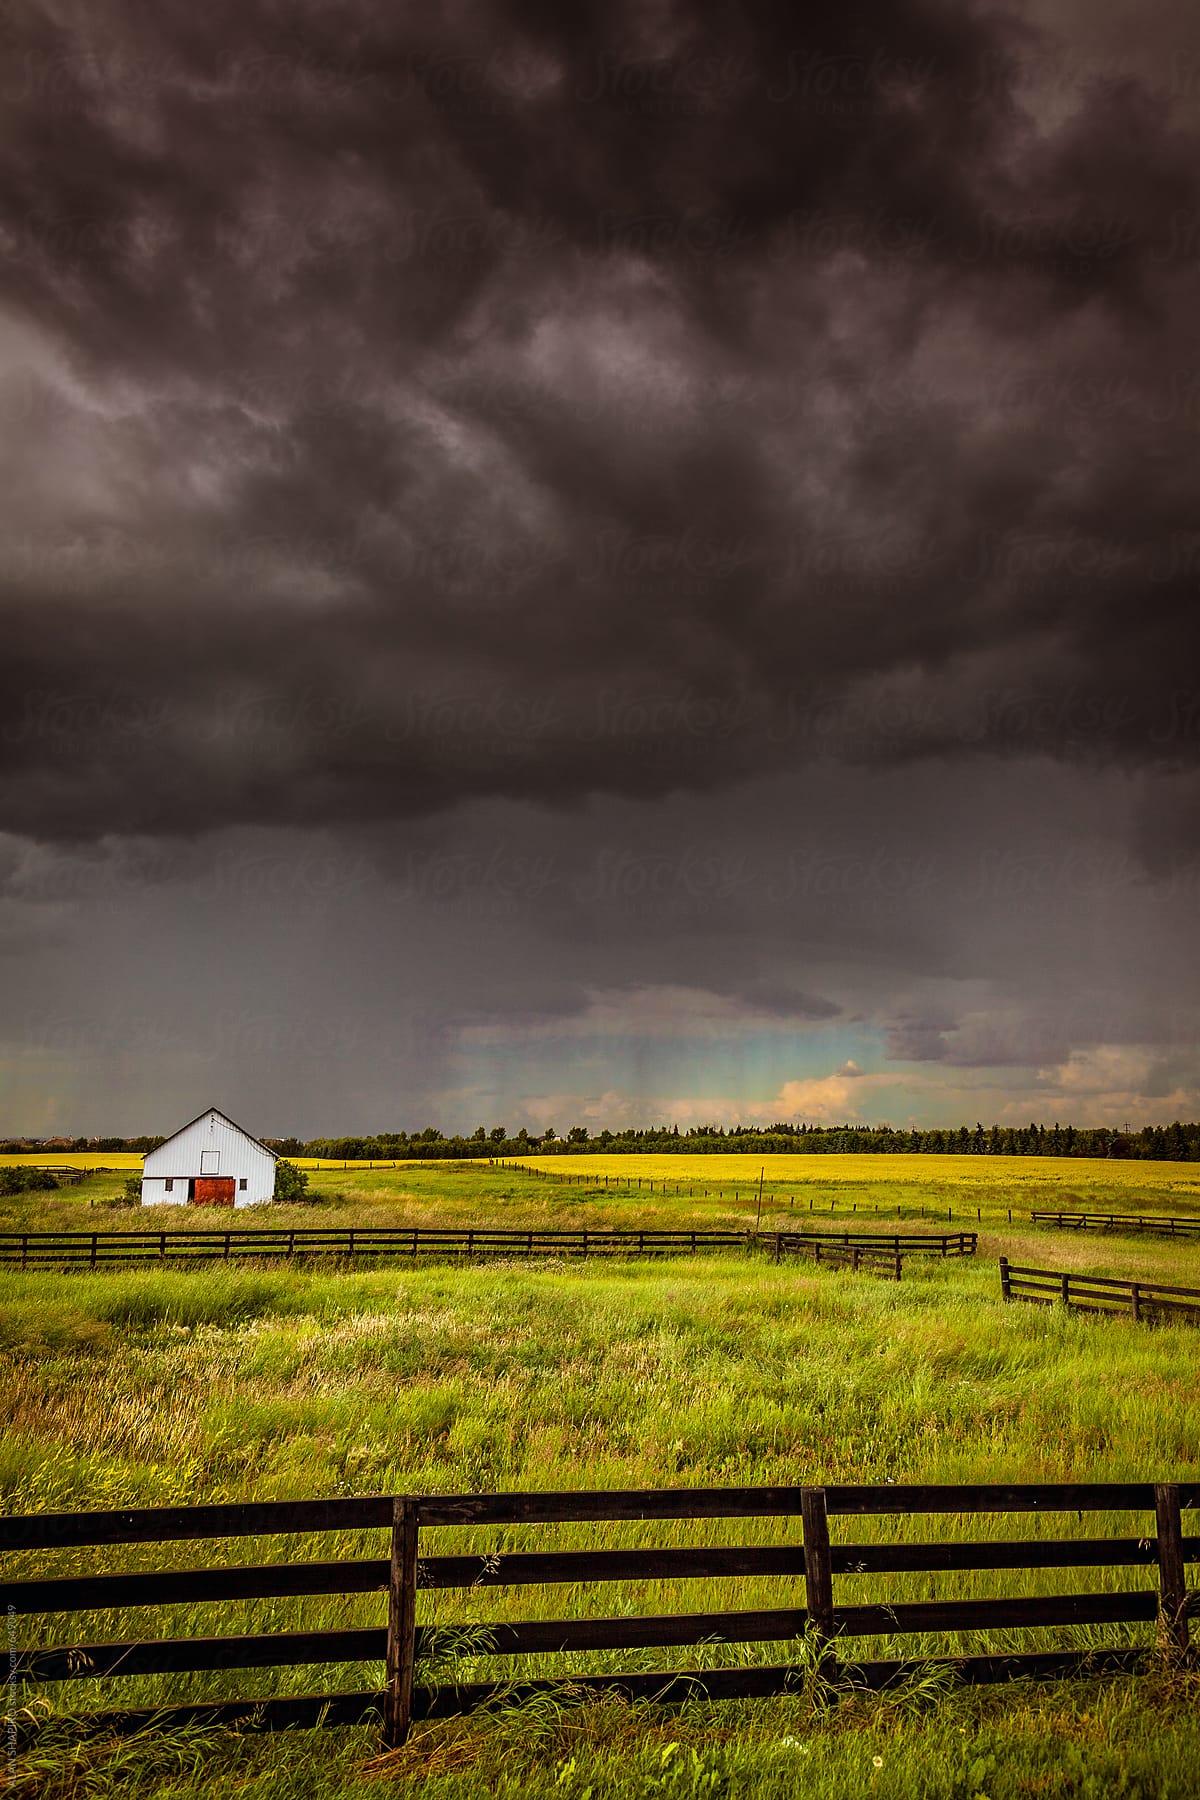 deserted barn and thunderstorms